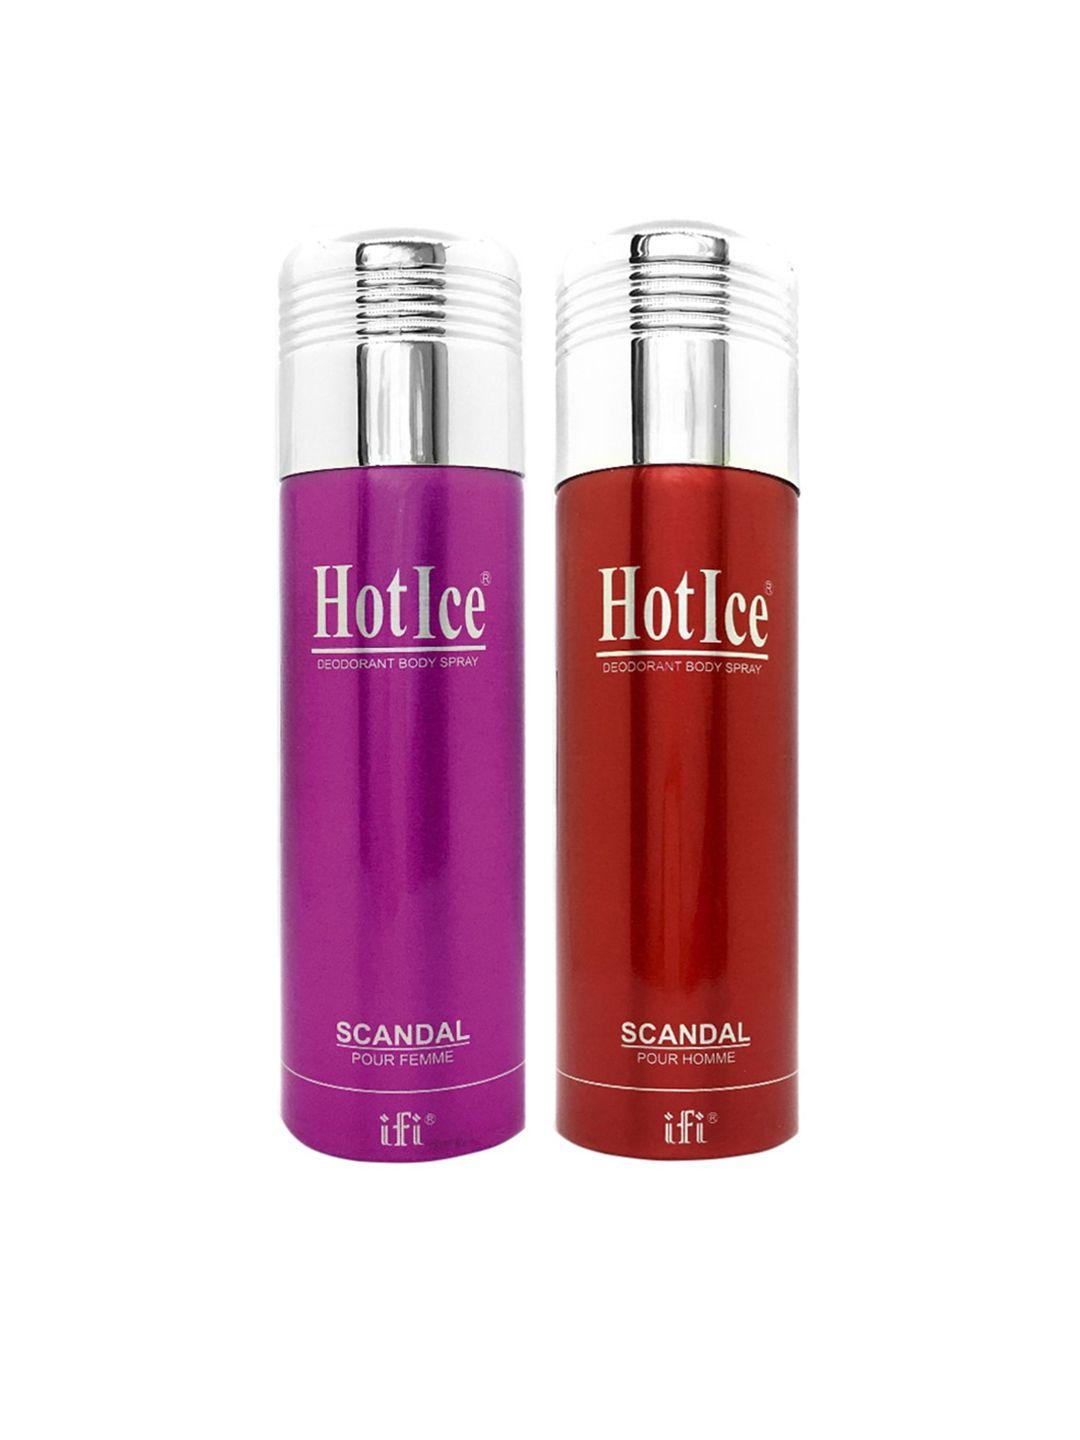 hot ice scandal fomme & scandal homme deodorant, 200ml each - ( set of 2)